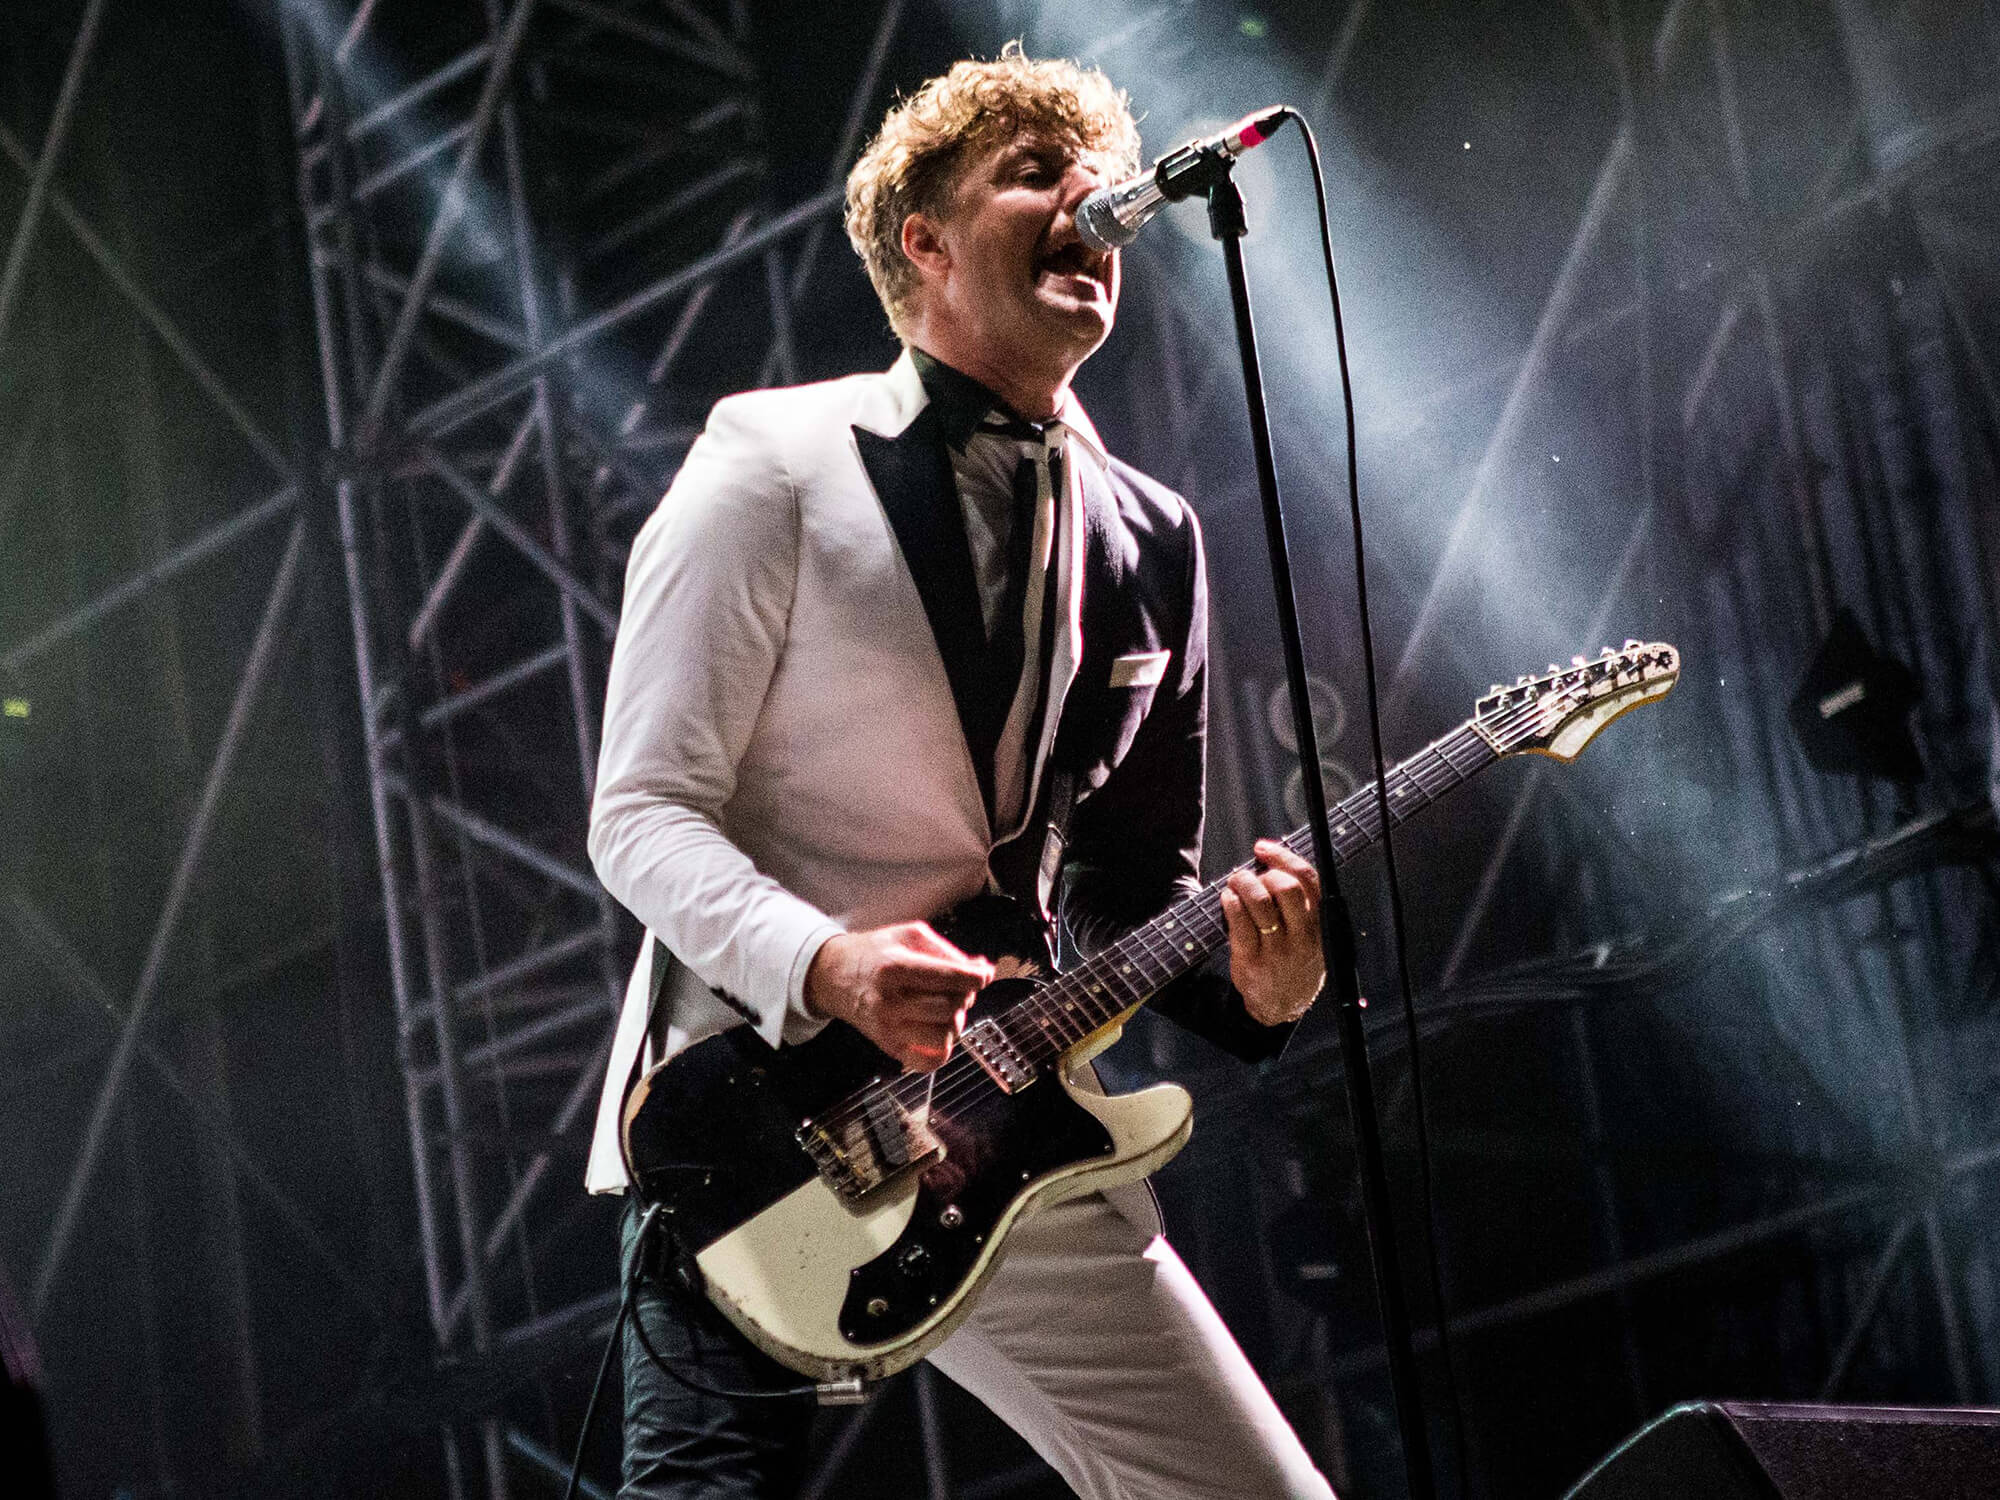 Nicholaus Arson of The Hives performs on stage